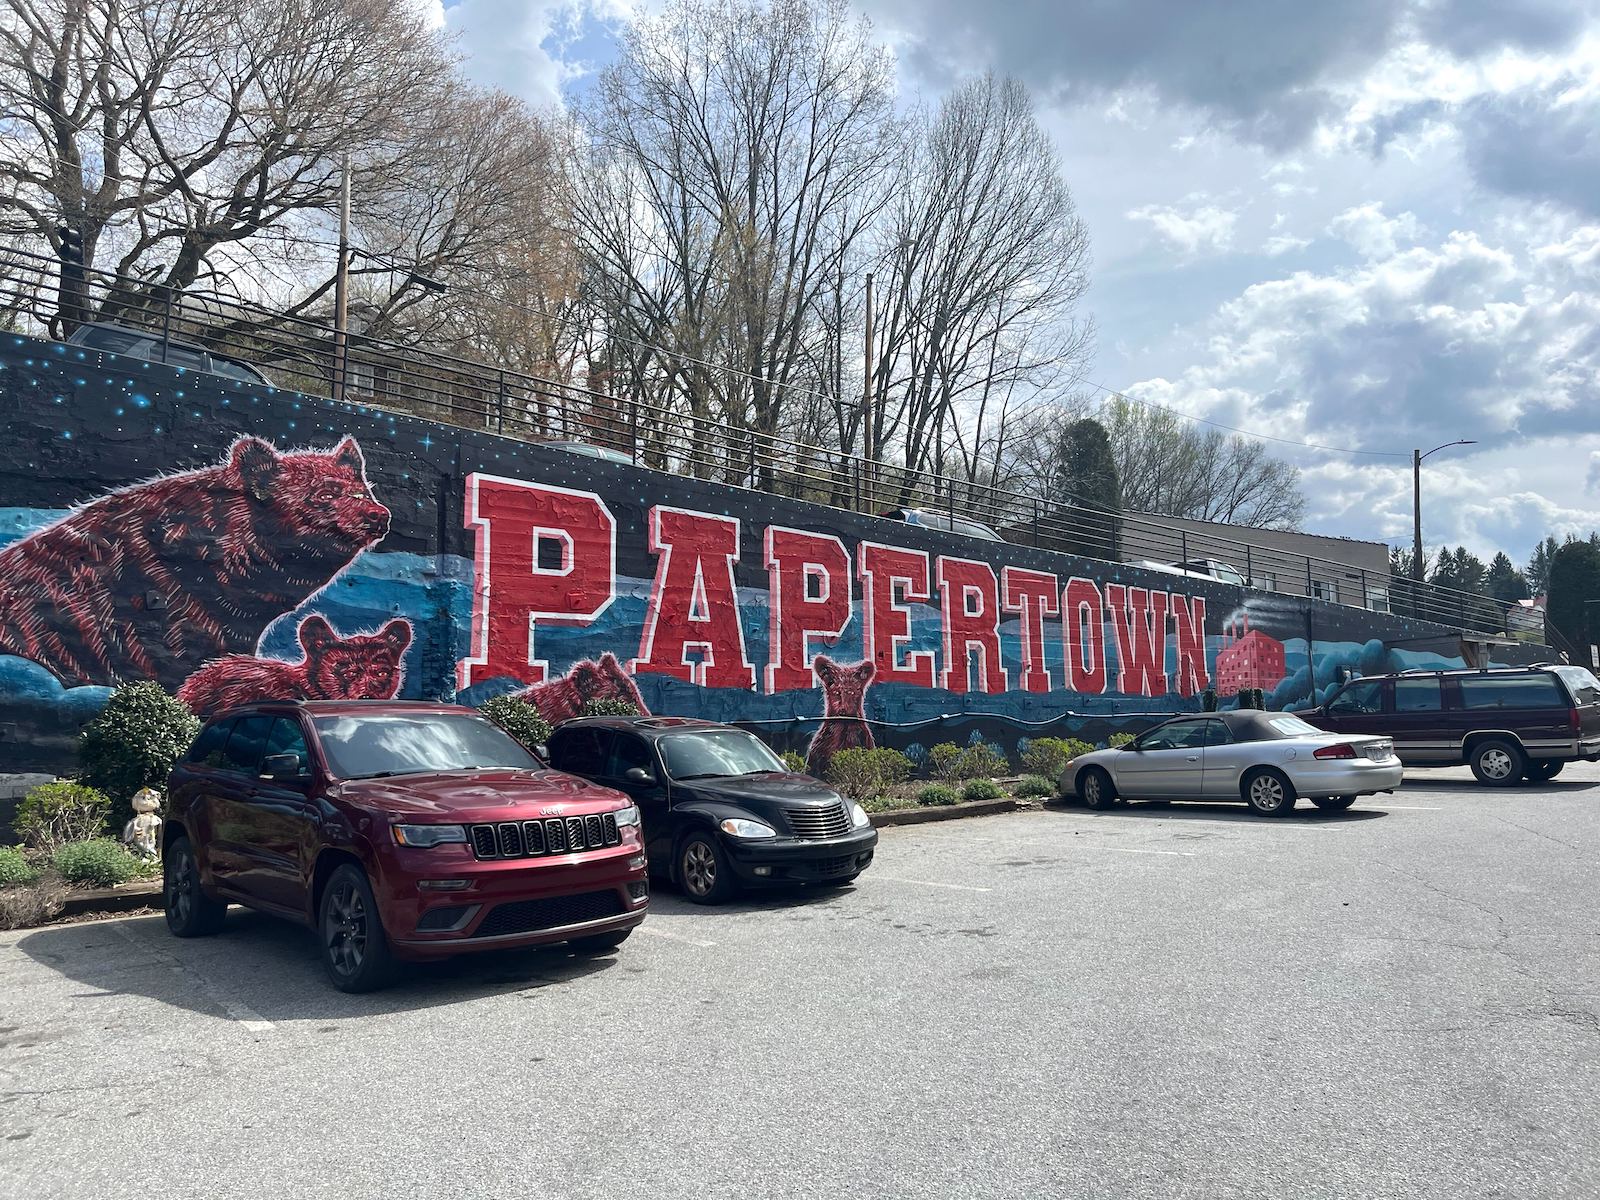 A large blue mural in downtown Canton, North Carolina shows two bears and the word "Papertown" in large red letters.